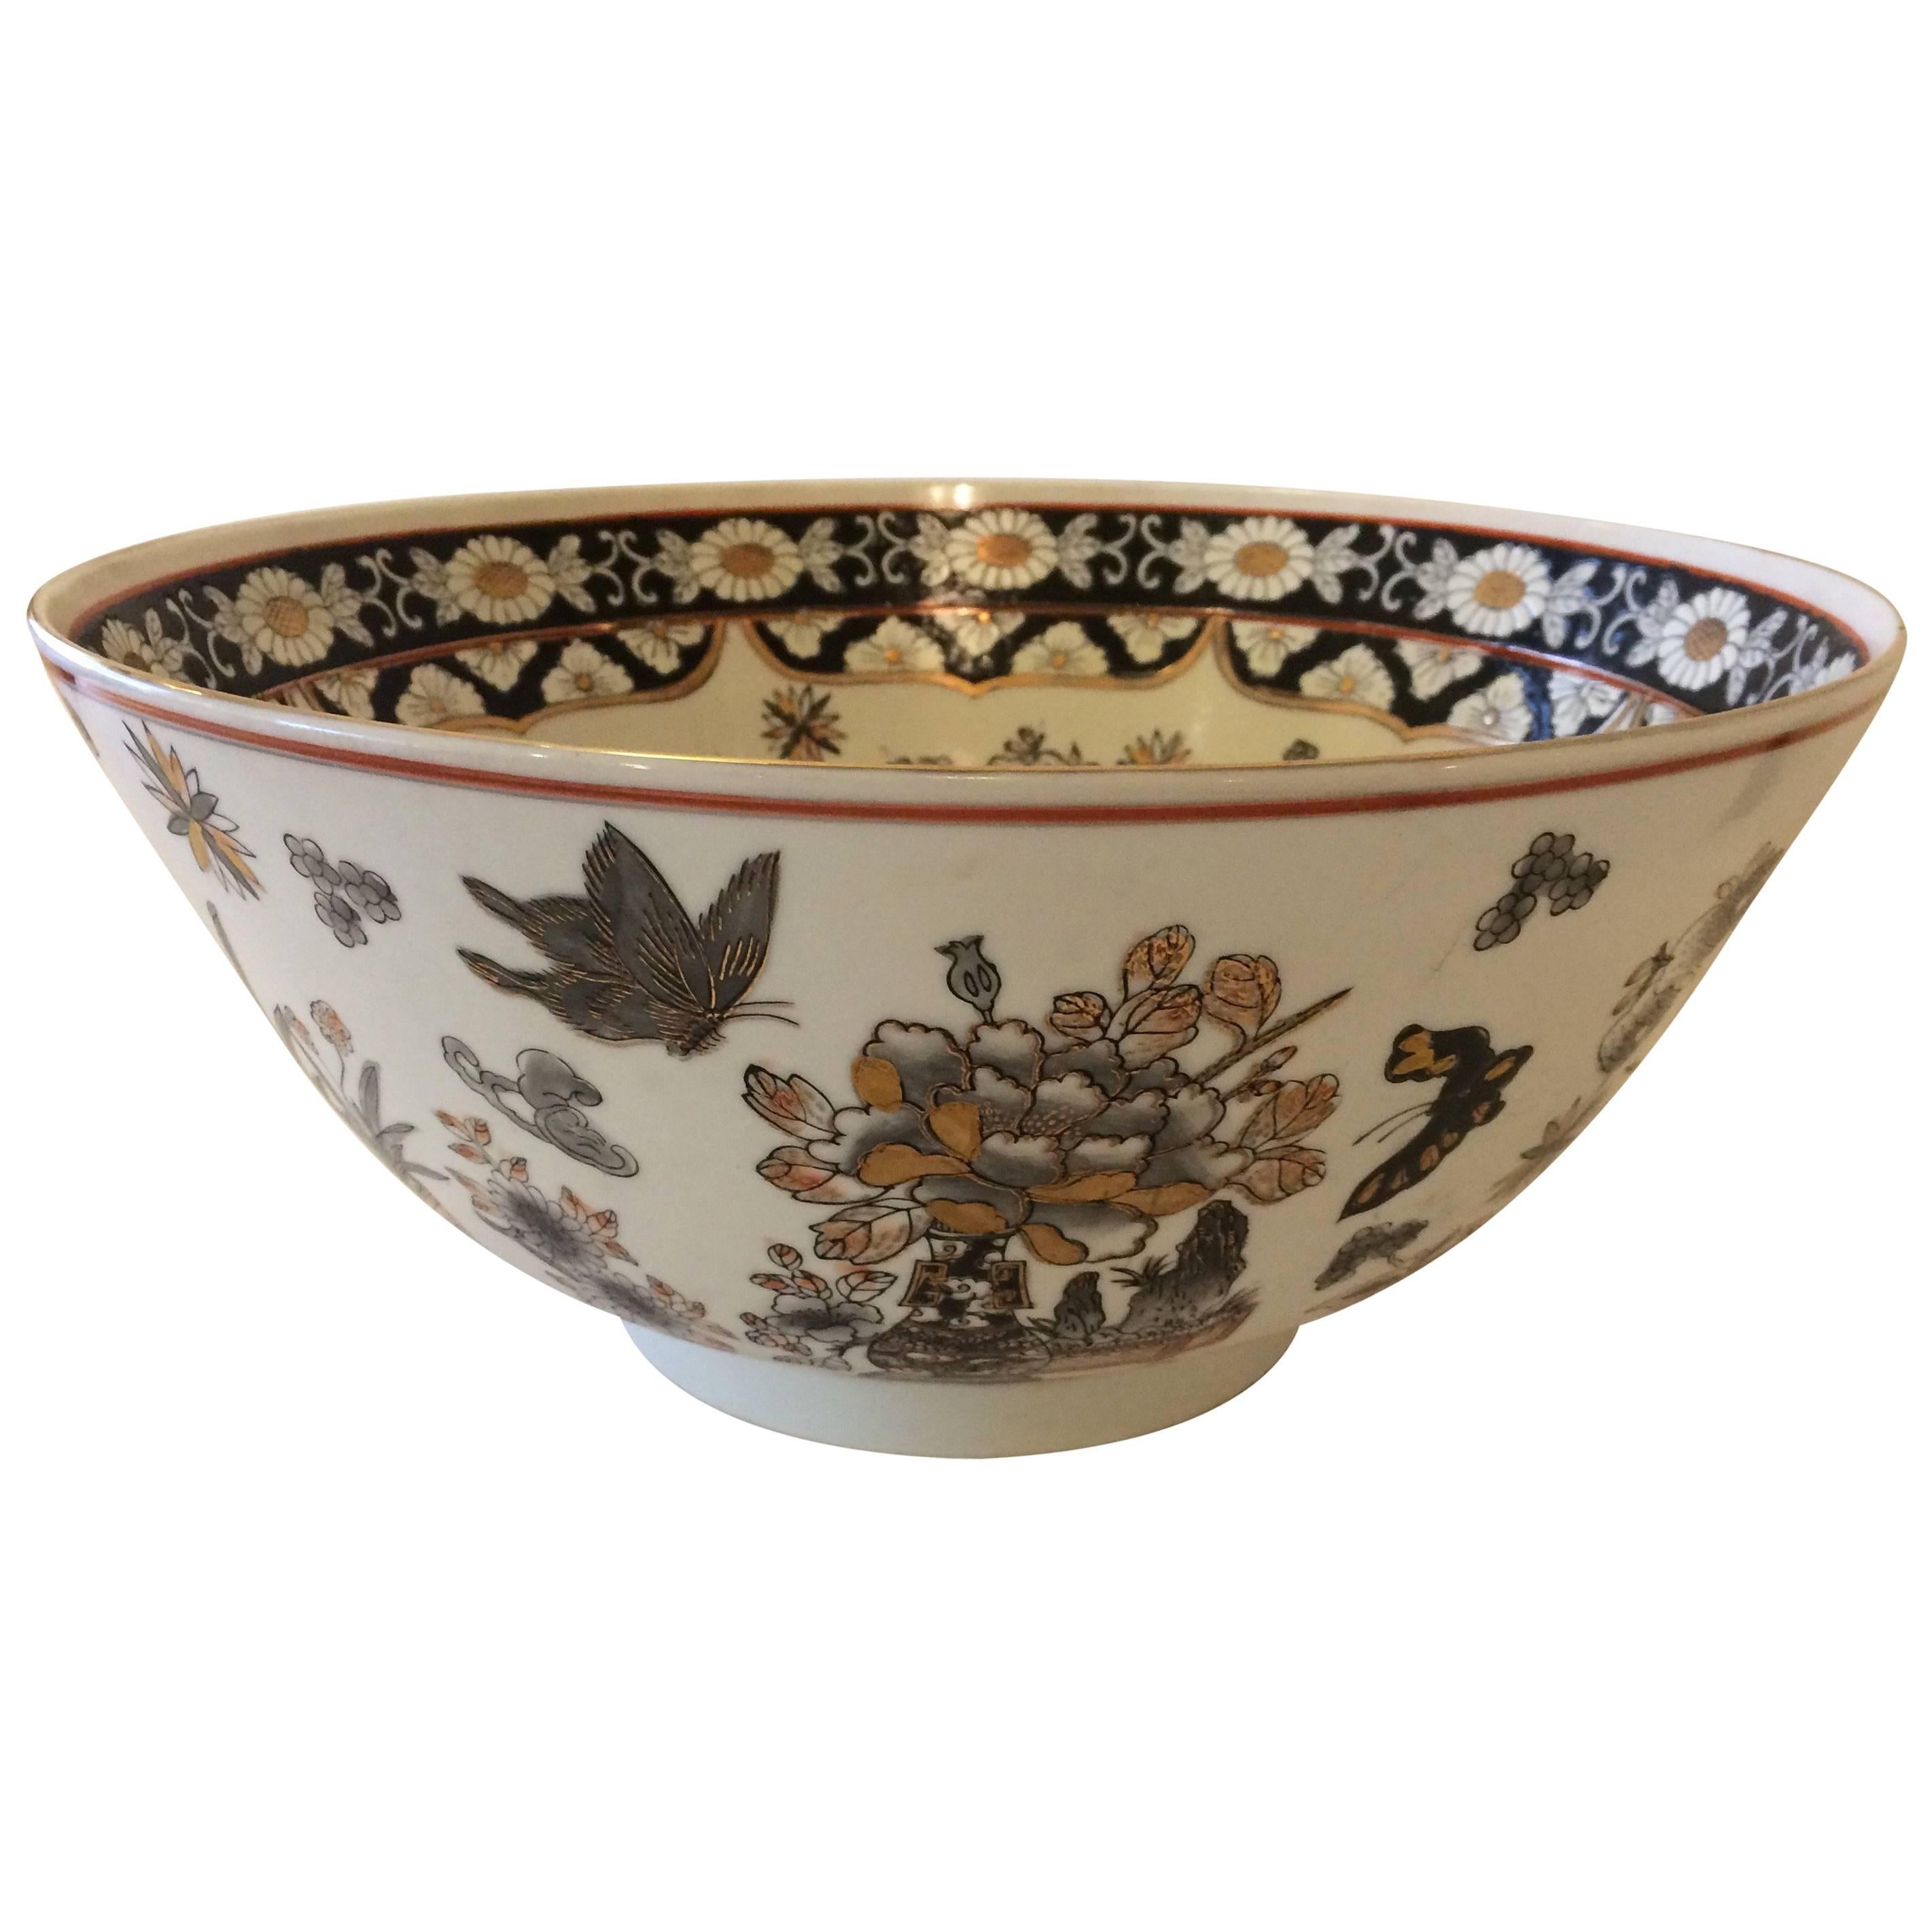 Magnificent Large Chinese Porcelain Center Bowl or Punch Bowl